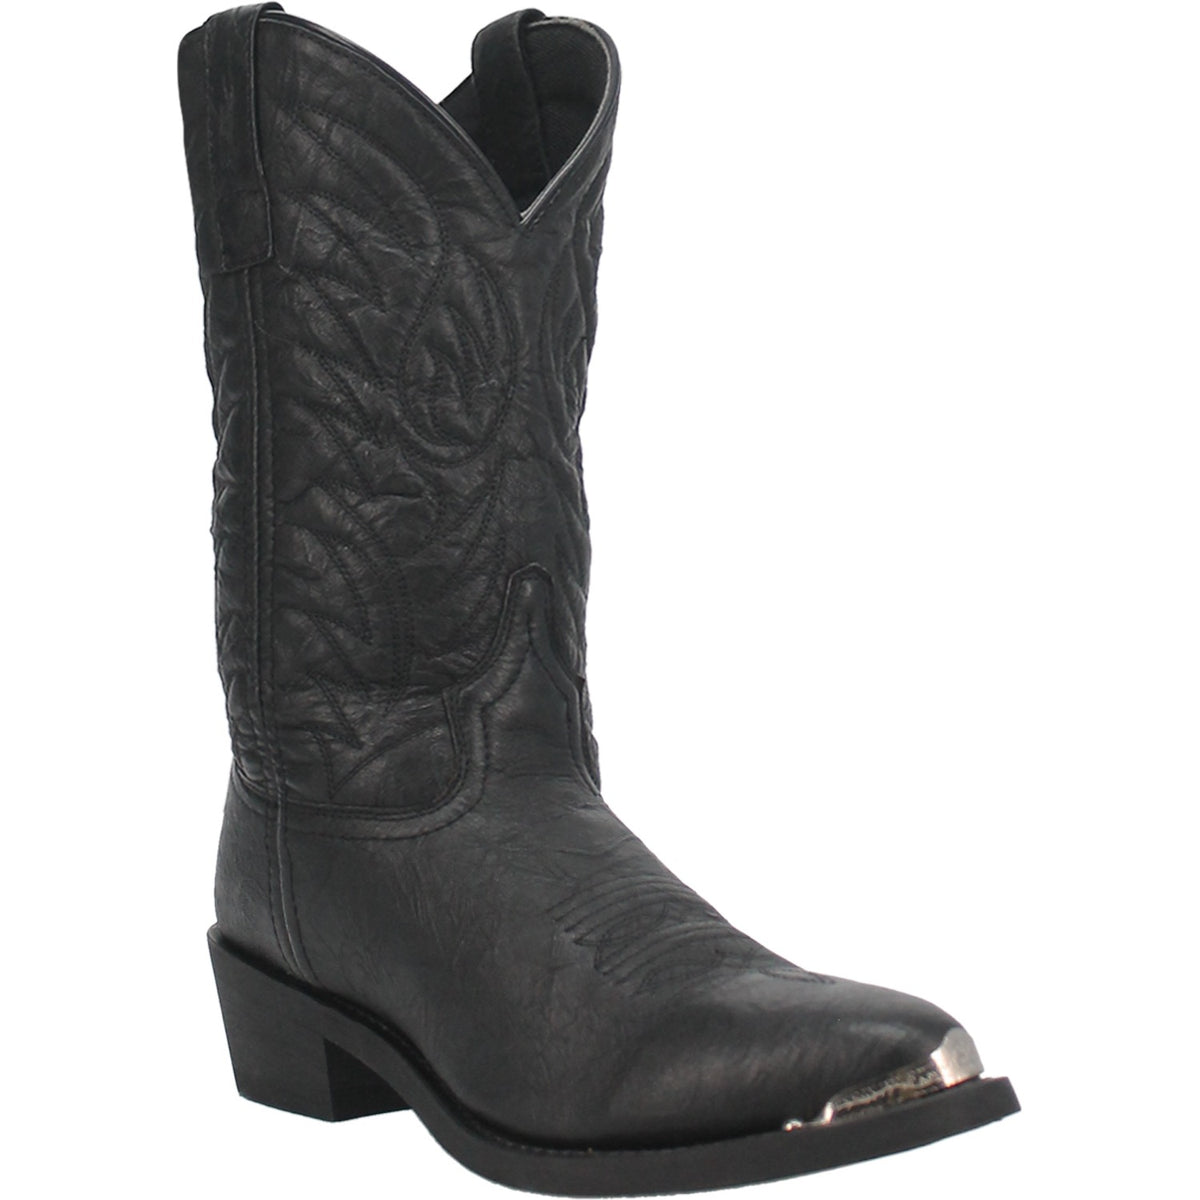 EAST BOUND LEATHER BOOT Cover